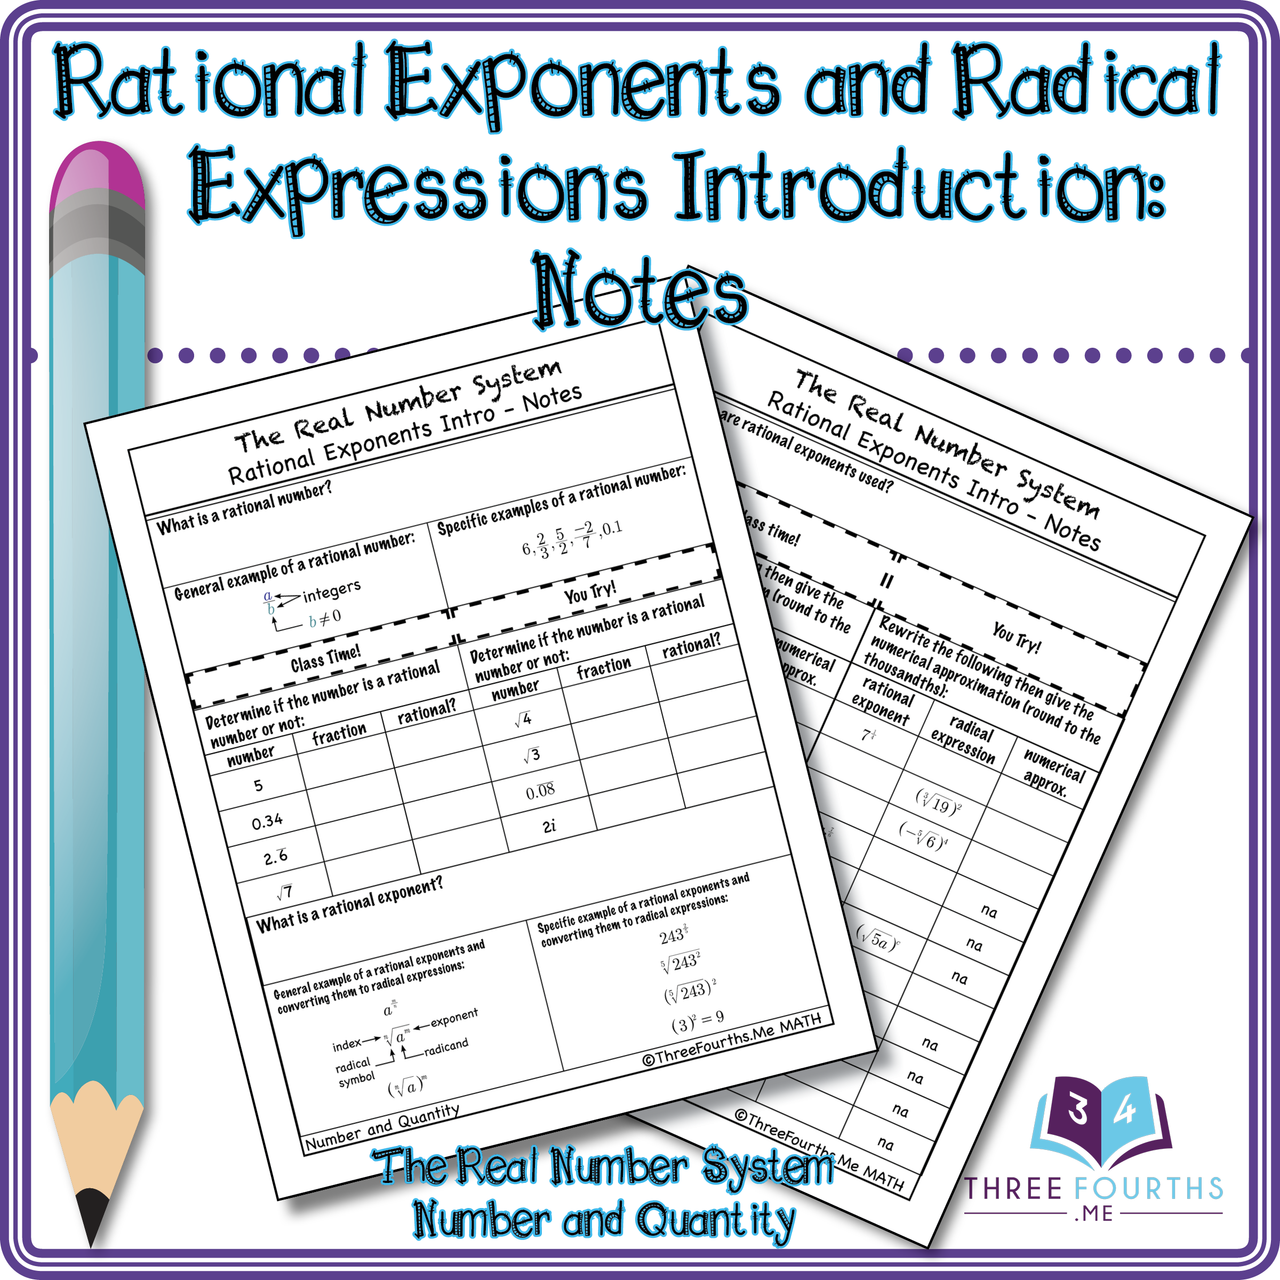 Rational Exponents and Radical Expressions Introduction Scaffolded Notes